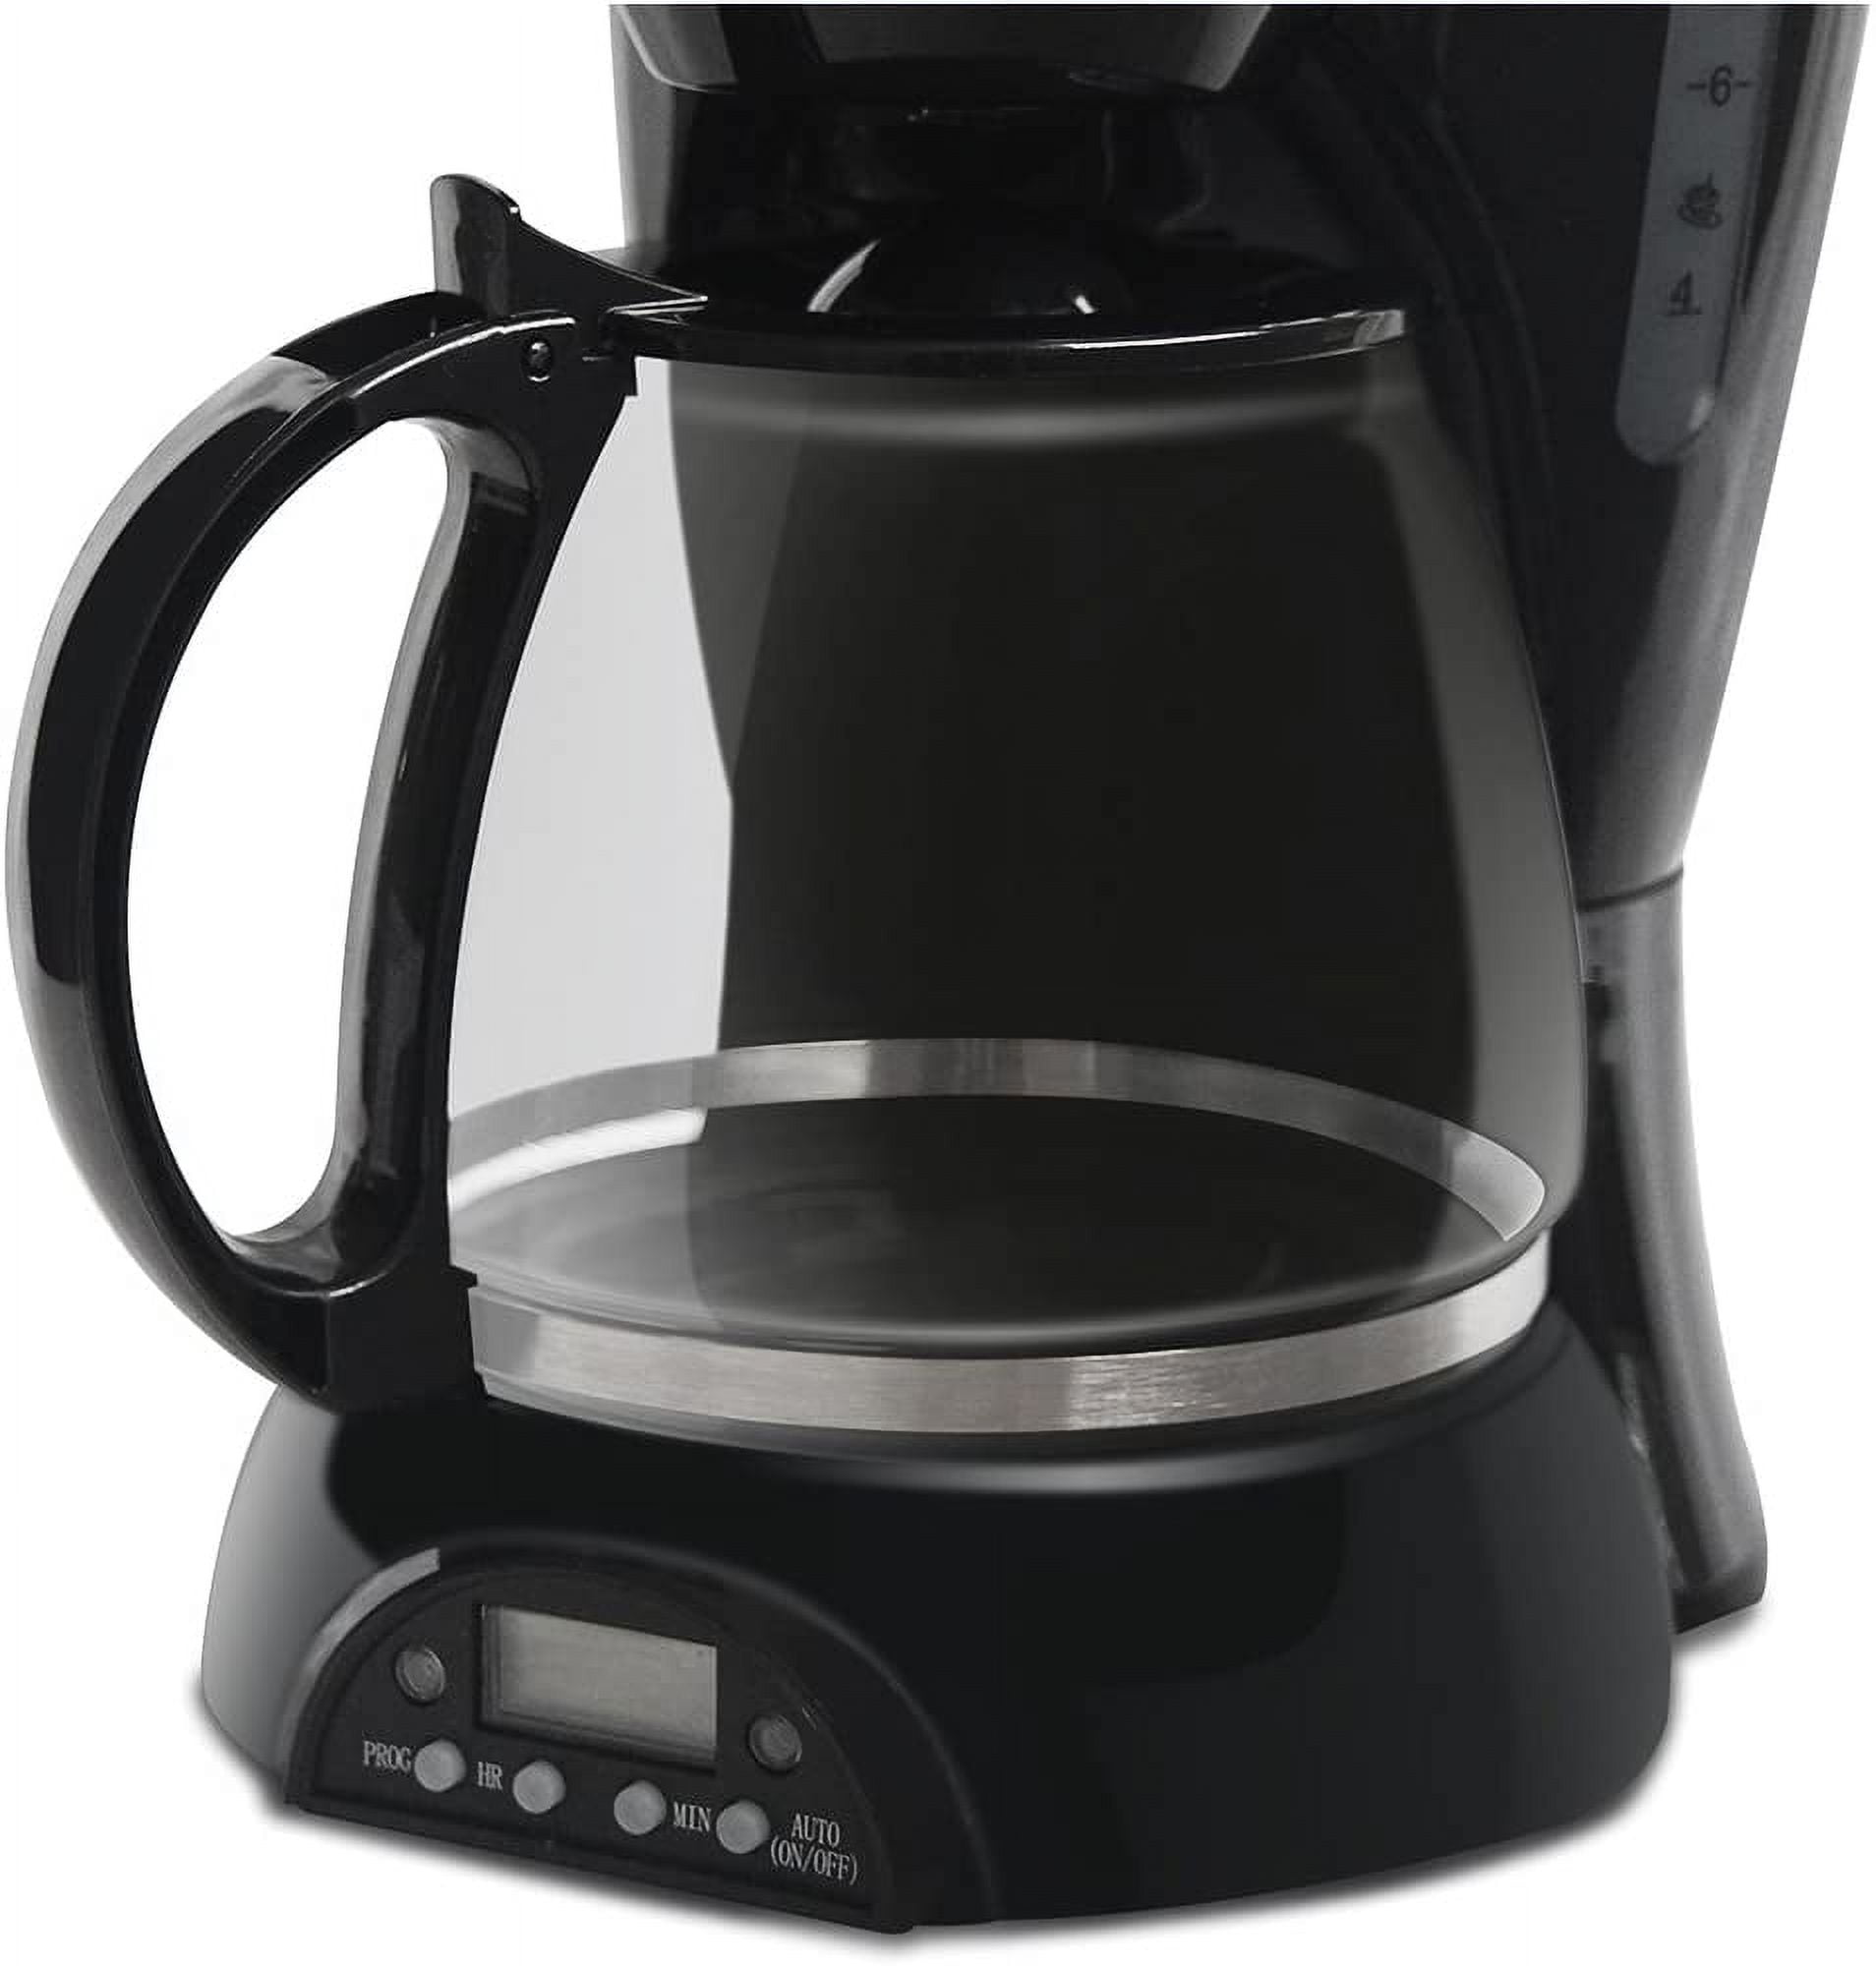 8 Cup Drip Coffee Maker - Stainless Steel Coffee Maker - Programmable  Coffee Maker with Timer - Bed Bath & Beyond - 37527216